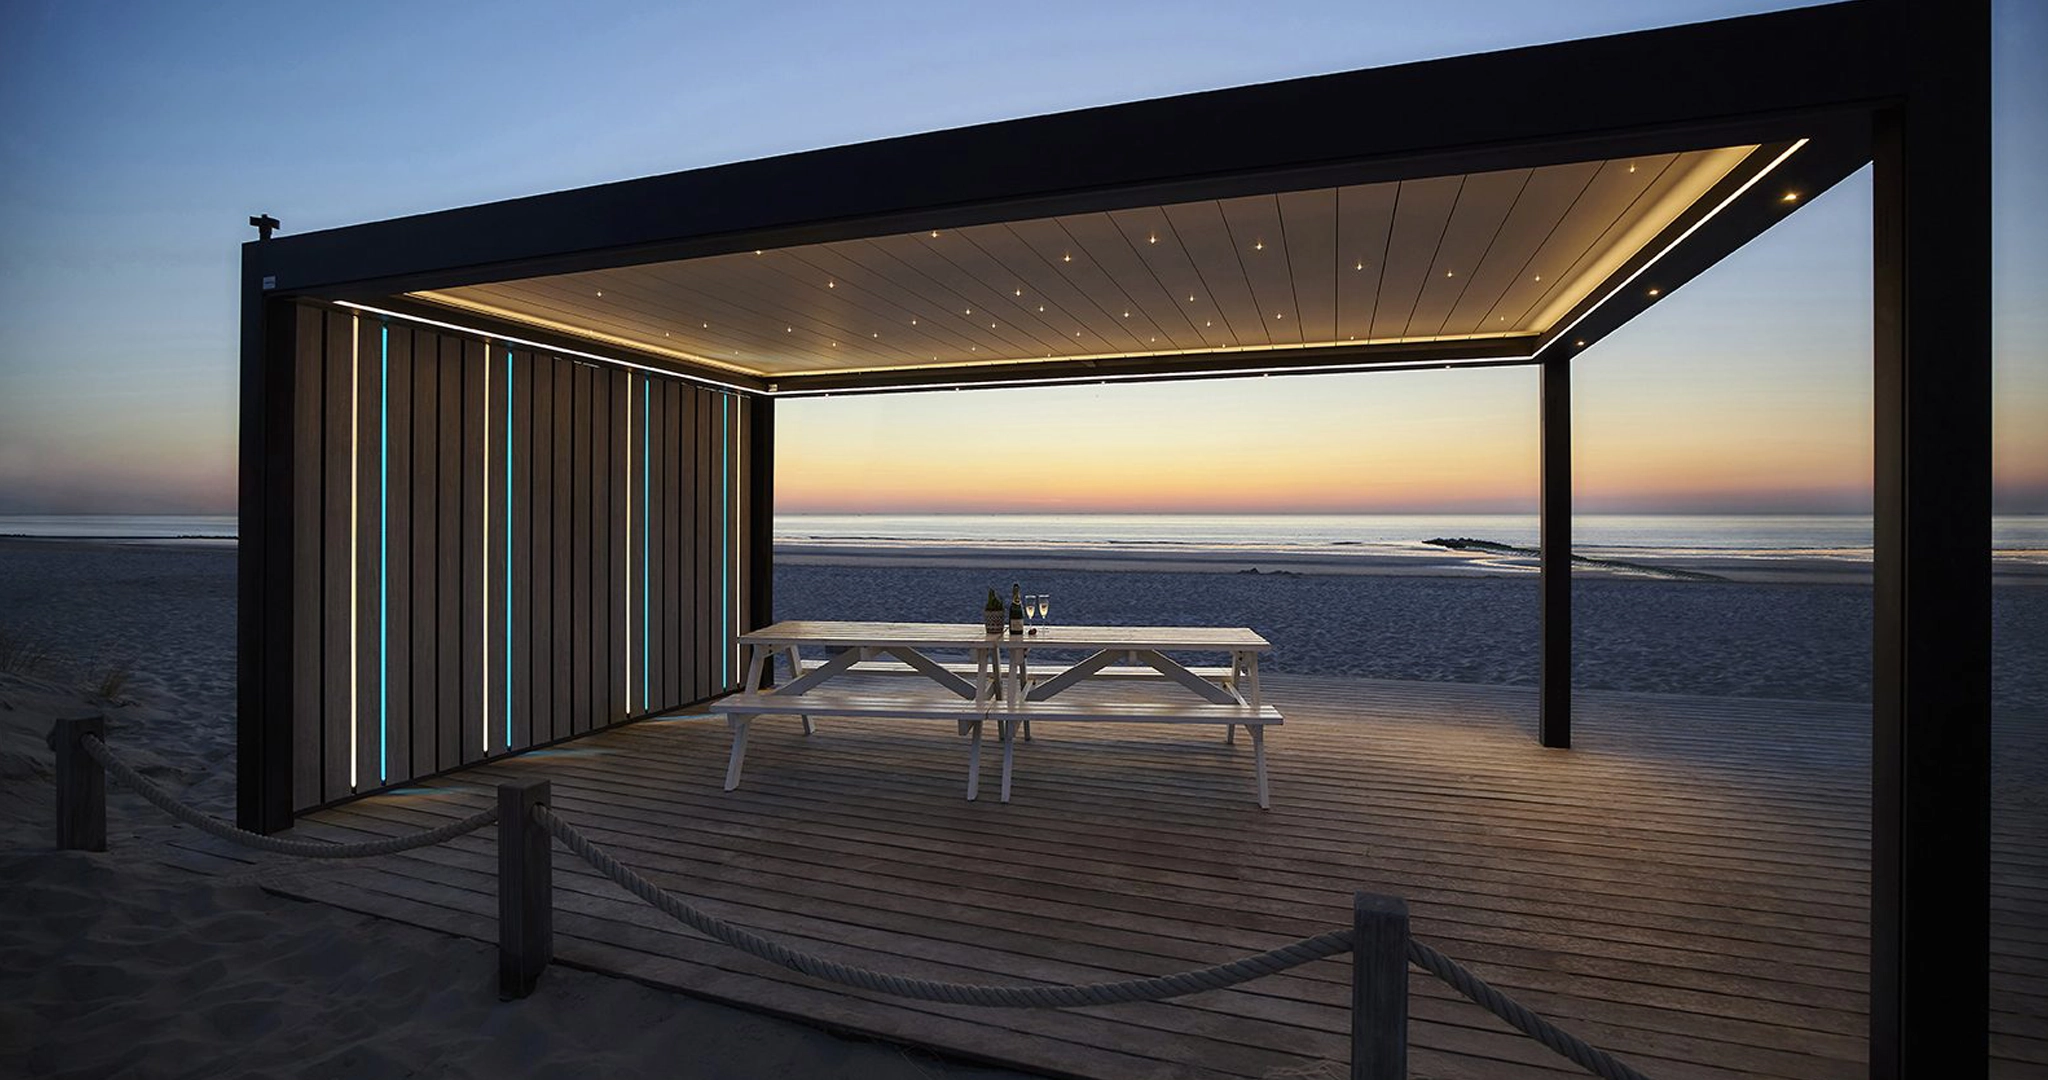 Beachside louvred roof pergola illuminated by LED lights, with a stylish wooden panel wall.